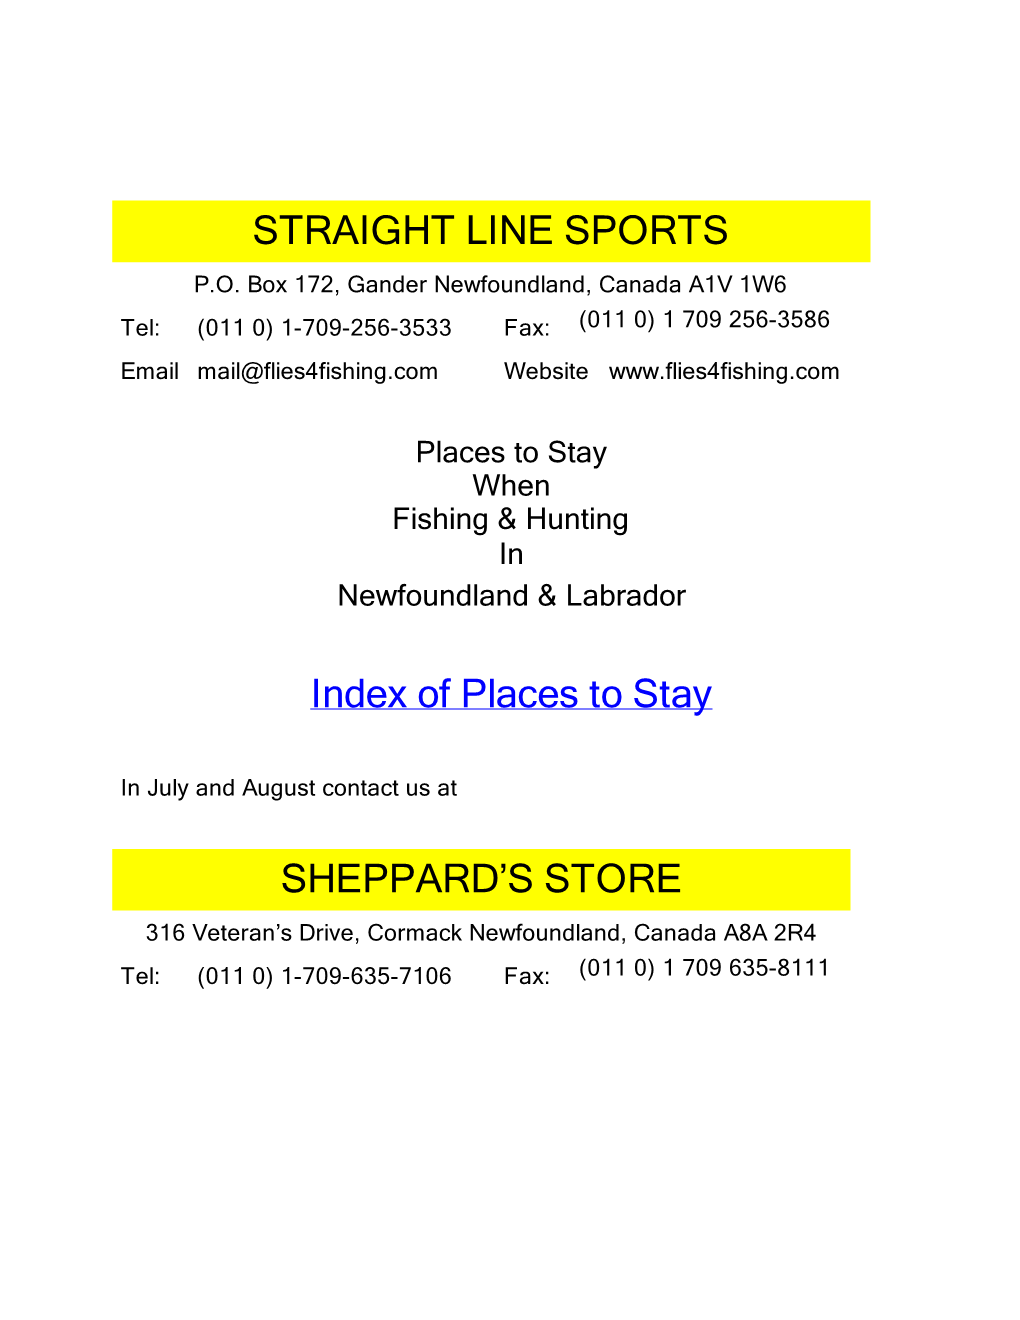 STRAIGHT LINE SPORTS Index of Places to Stay SHEPPARD's STORE